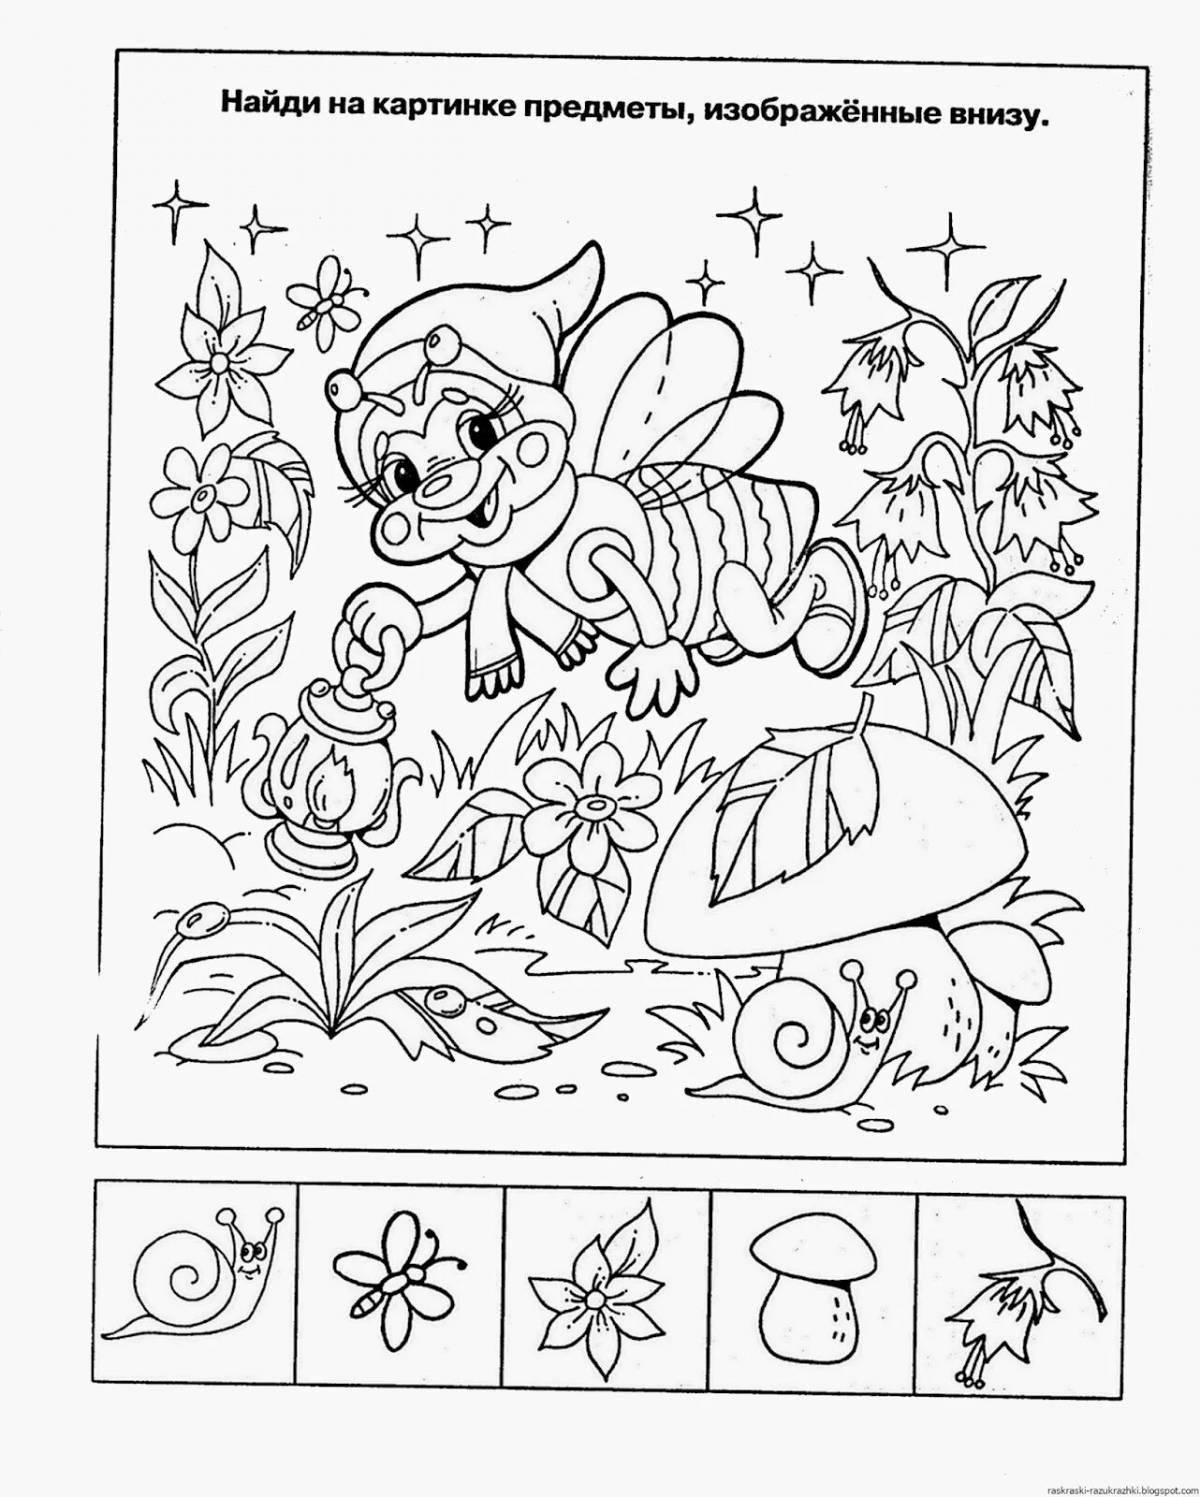 Delightful coloring book for children, developing